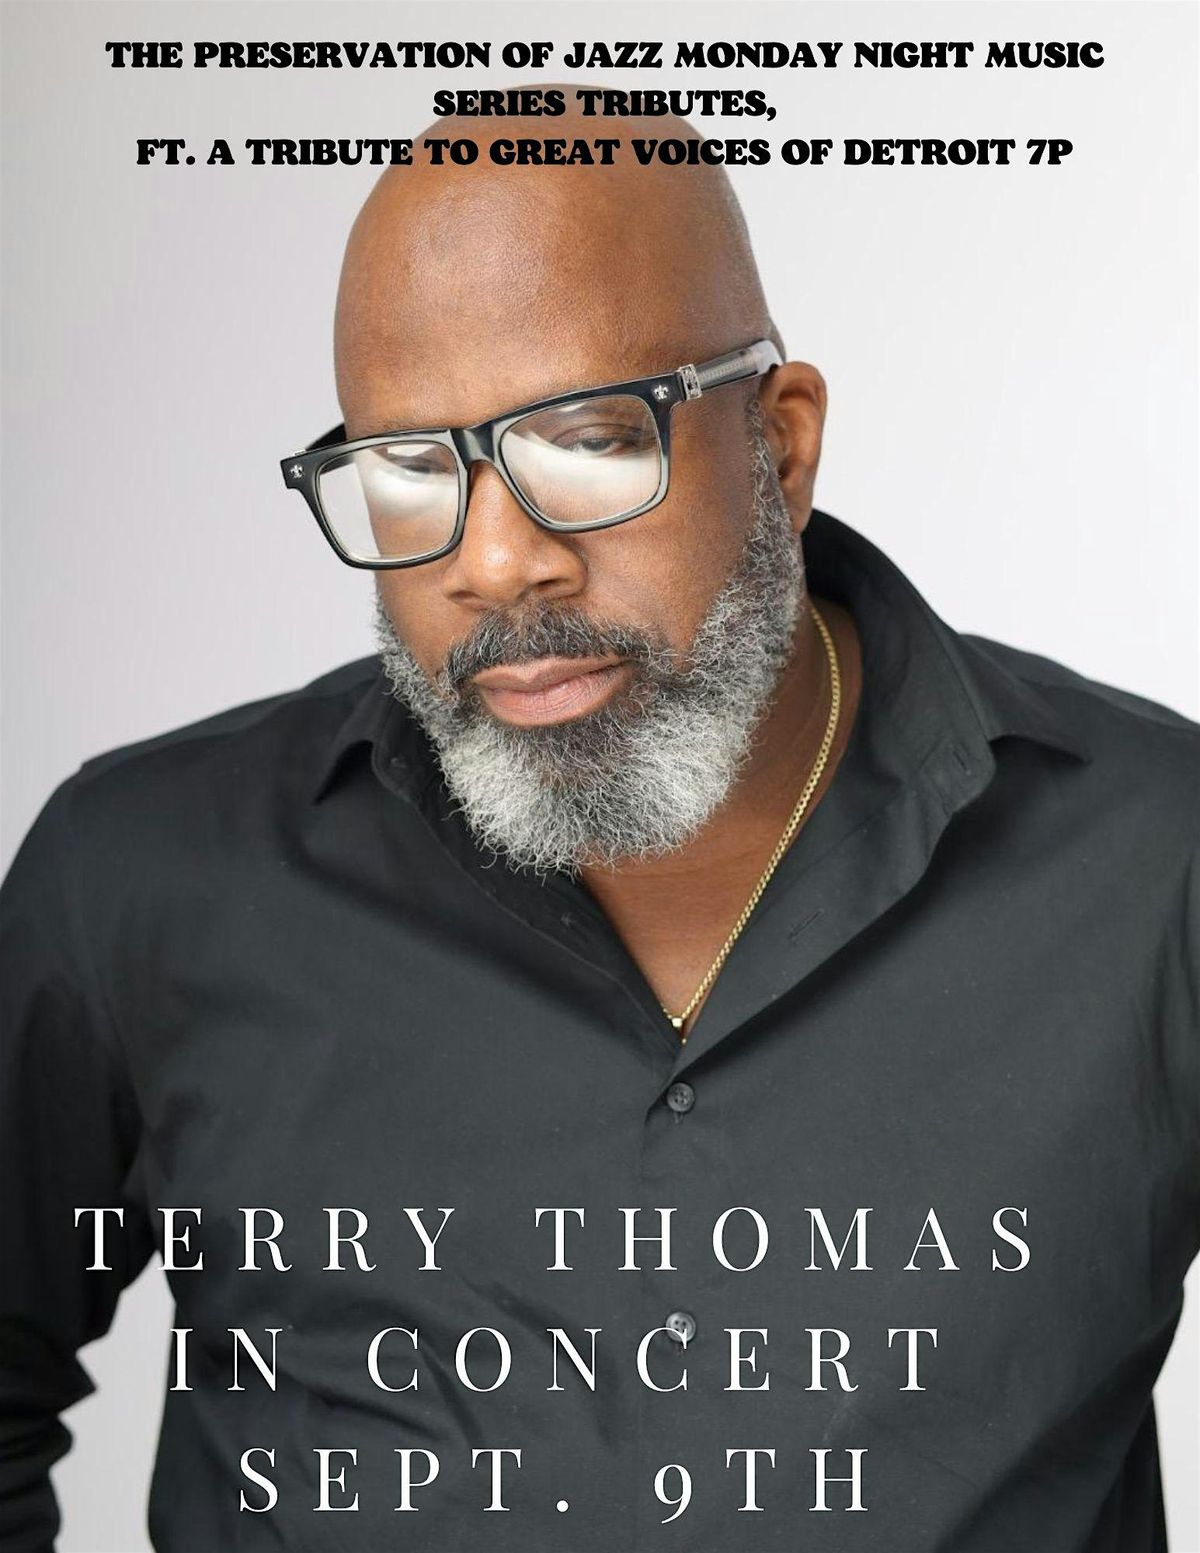 A Tribute to the Great voices of Detroit ft.Terry Thomas in Concert